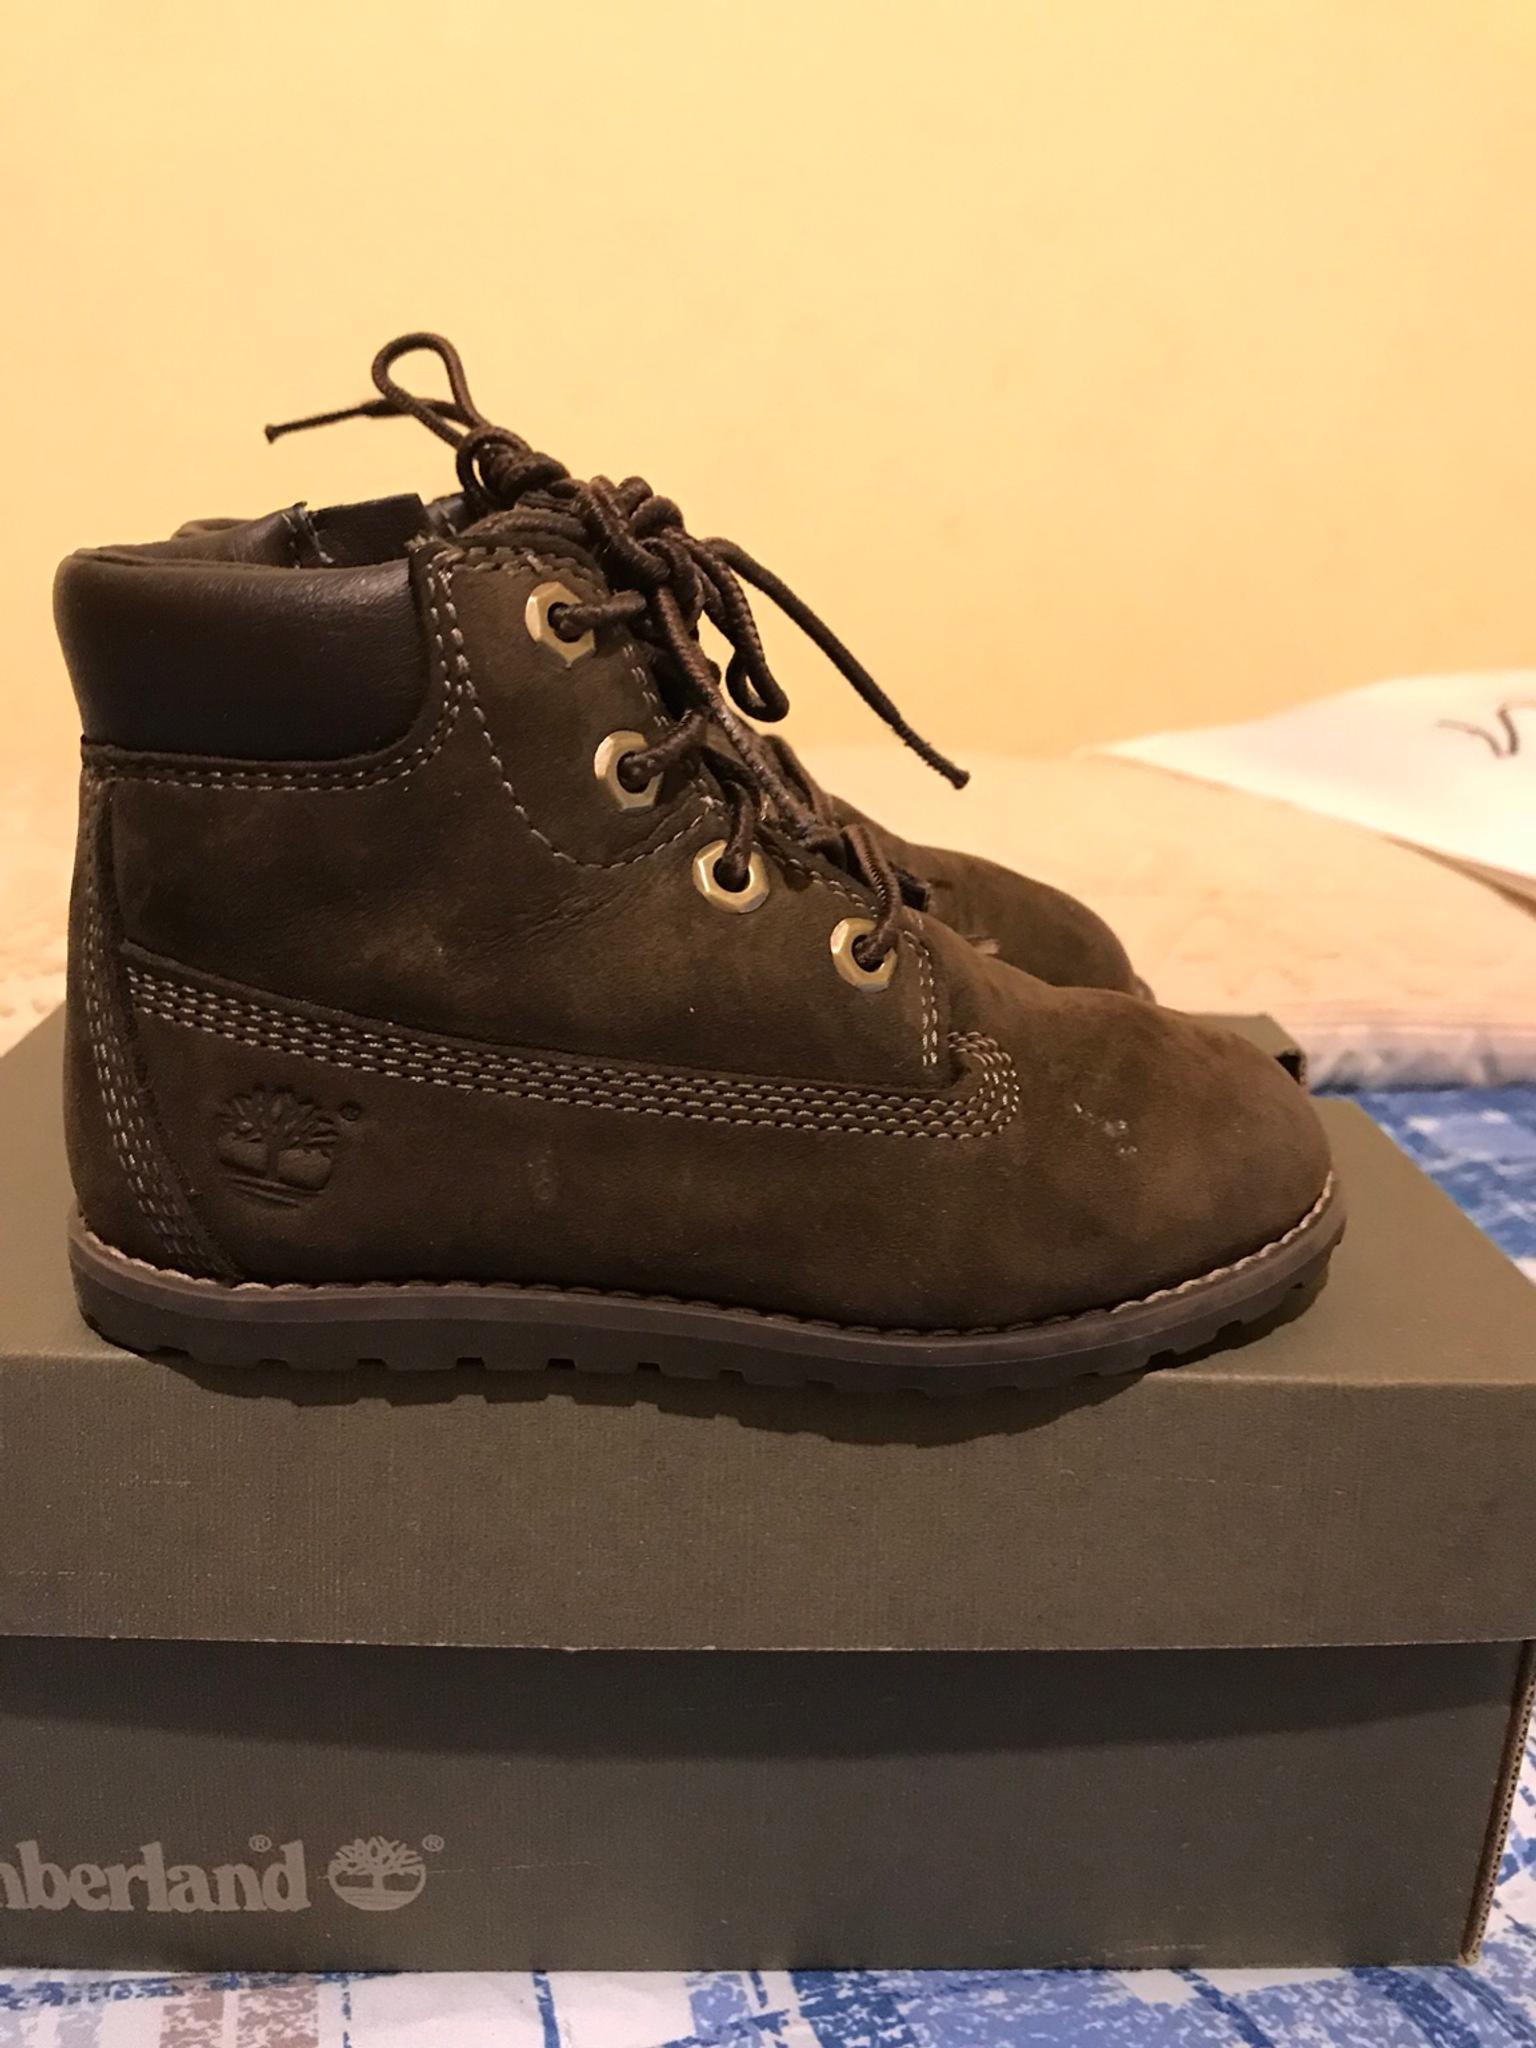 Scarpe timberland bimbo n. 26 in 00134 Roma for €19.00 for sale | Shpock